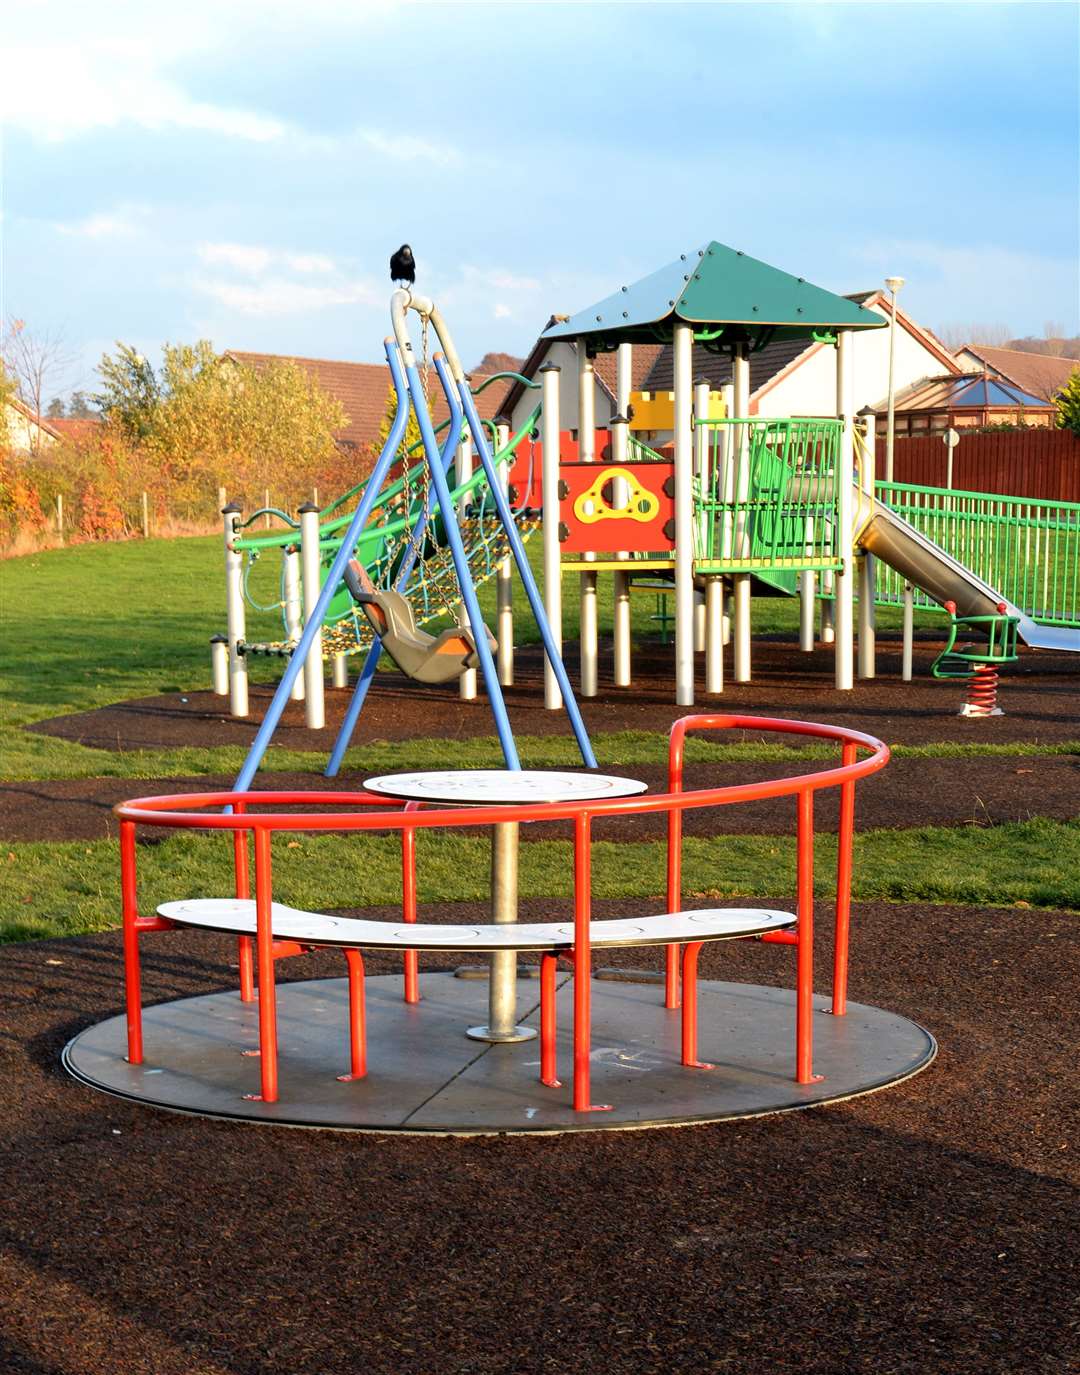 Play equipment across the region is no longer subject to safety assessments and should not be used in order to help reduce the spread of coronavirus.